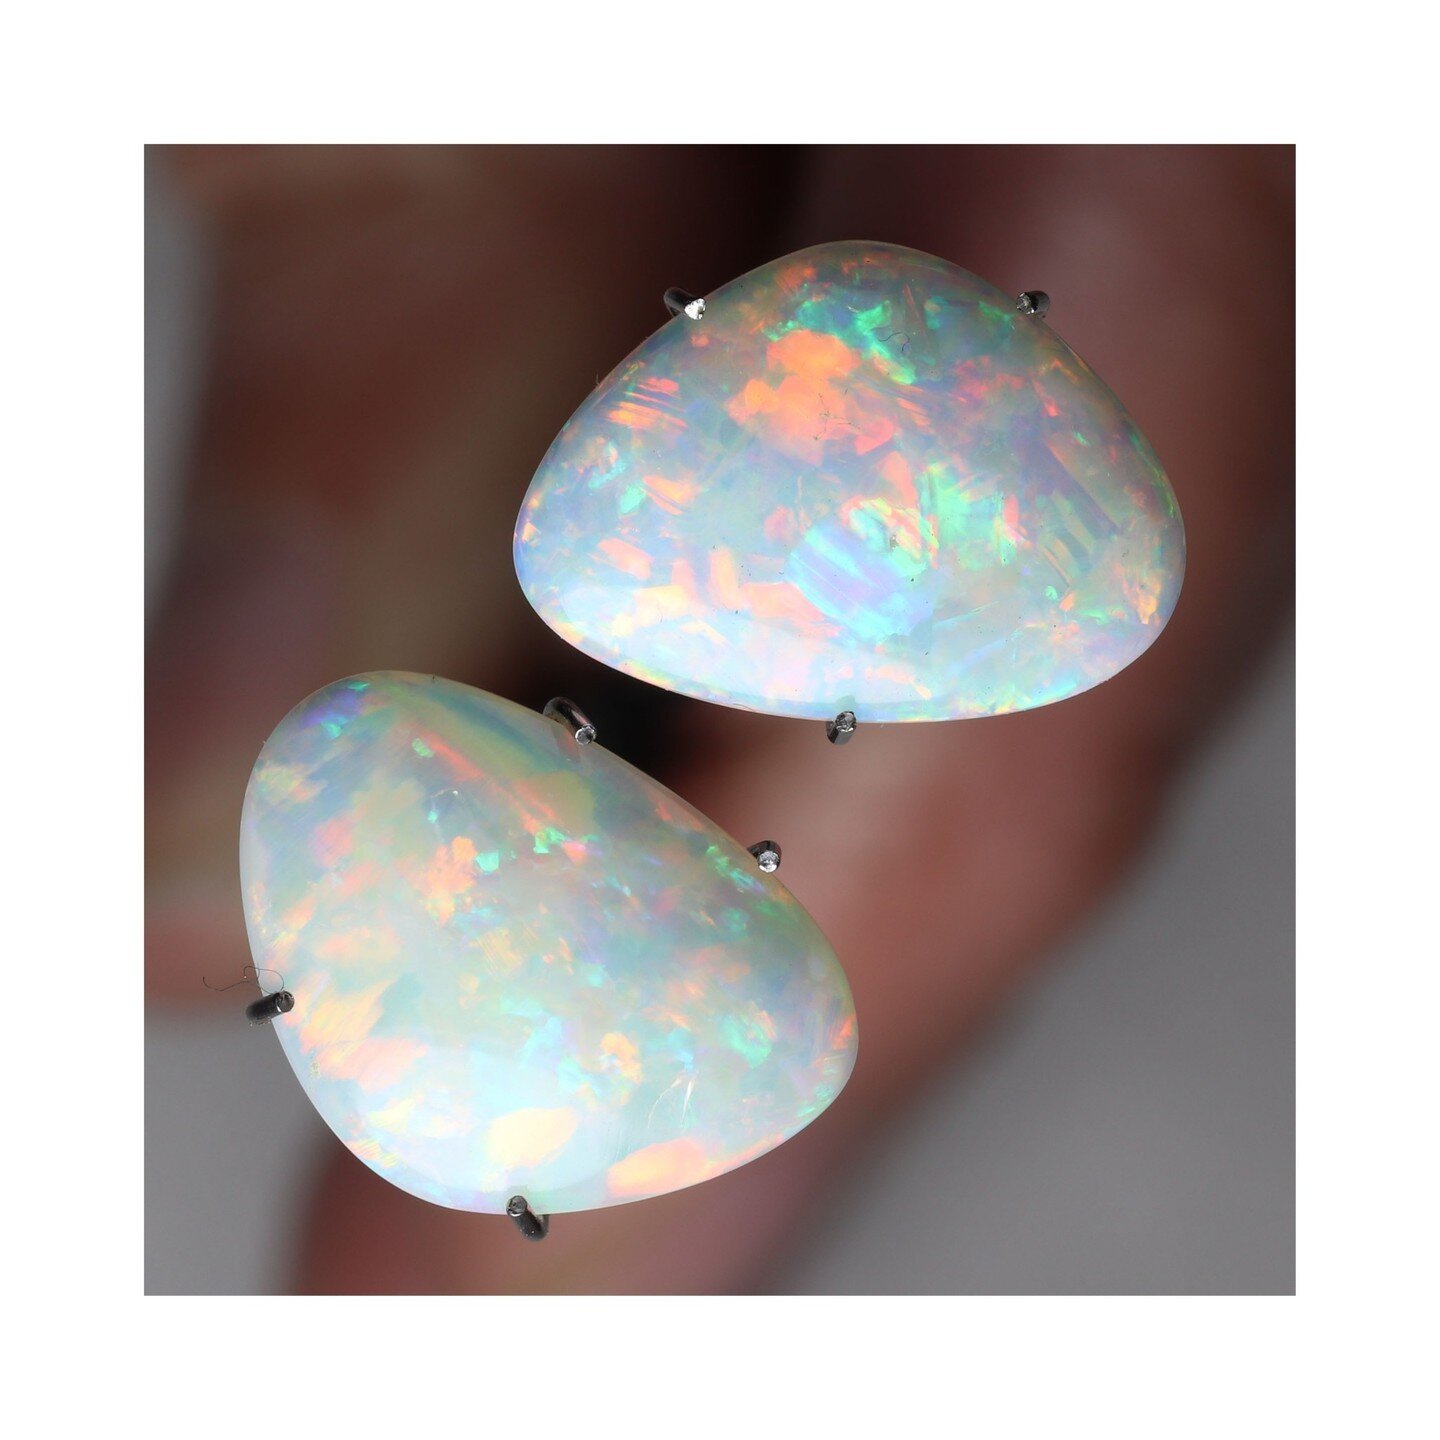 Twinsie free-form crystal opal hailing from Coober Pedy. Collectively they're 3.9ct and roughly 13 x 9.5mm each. 

What a spectacular pair of earrings these would make! 🙌

#opalpair #australianopal #opallove #unsetopal #looseopal #crystalopal